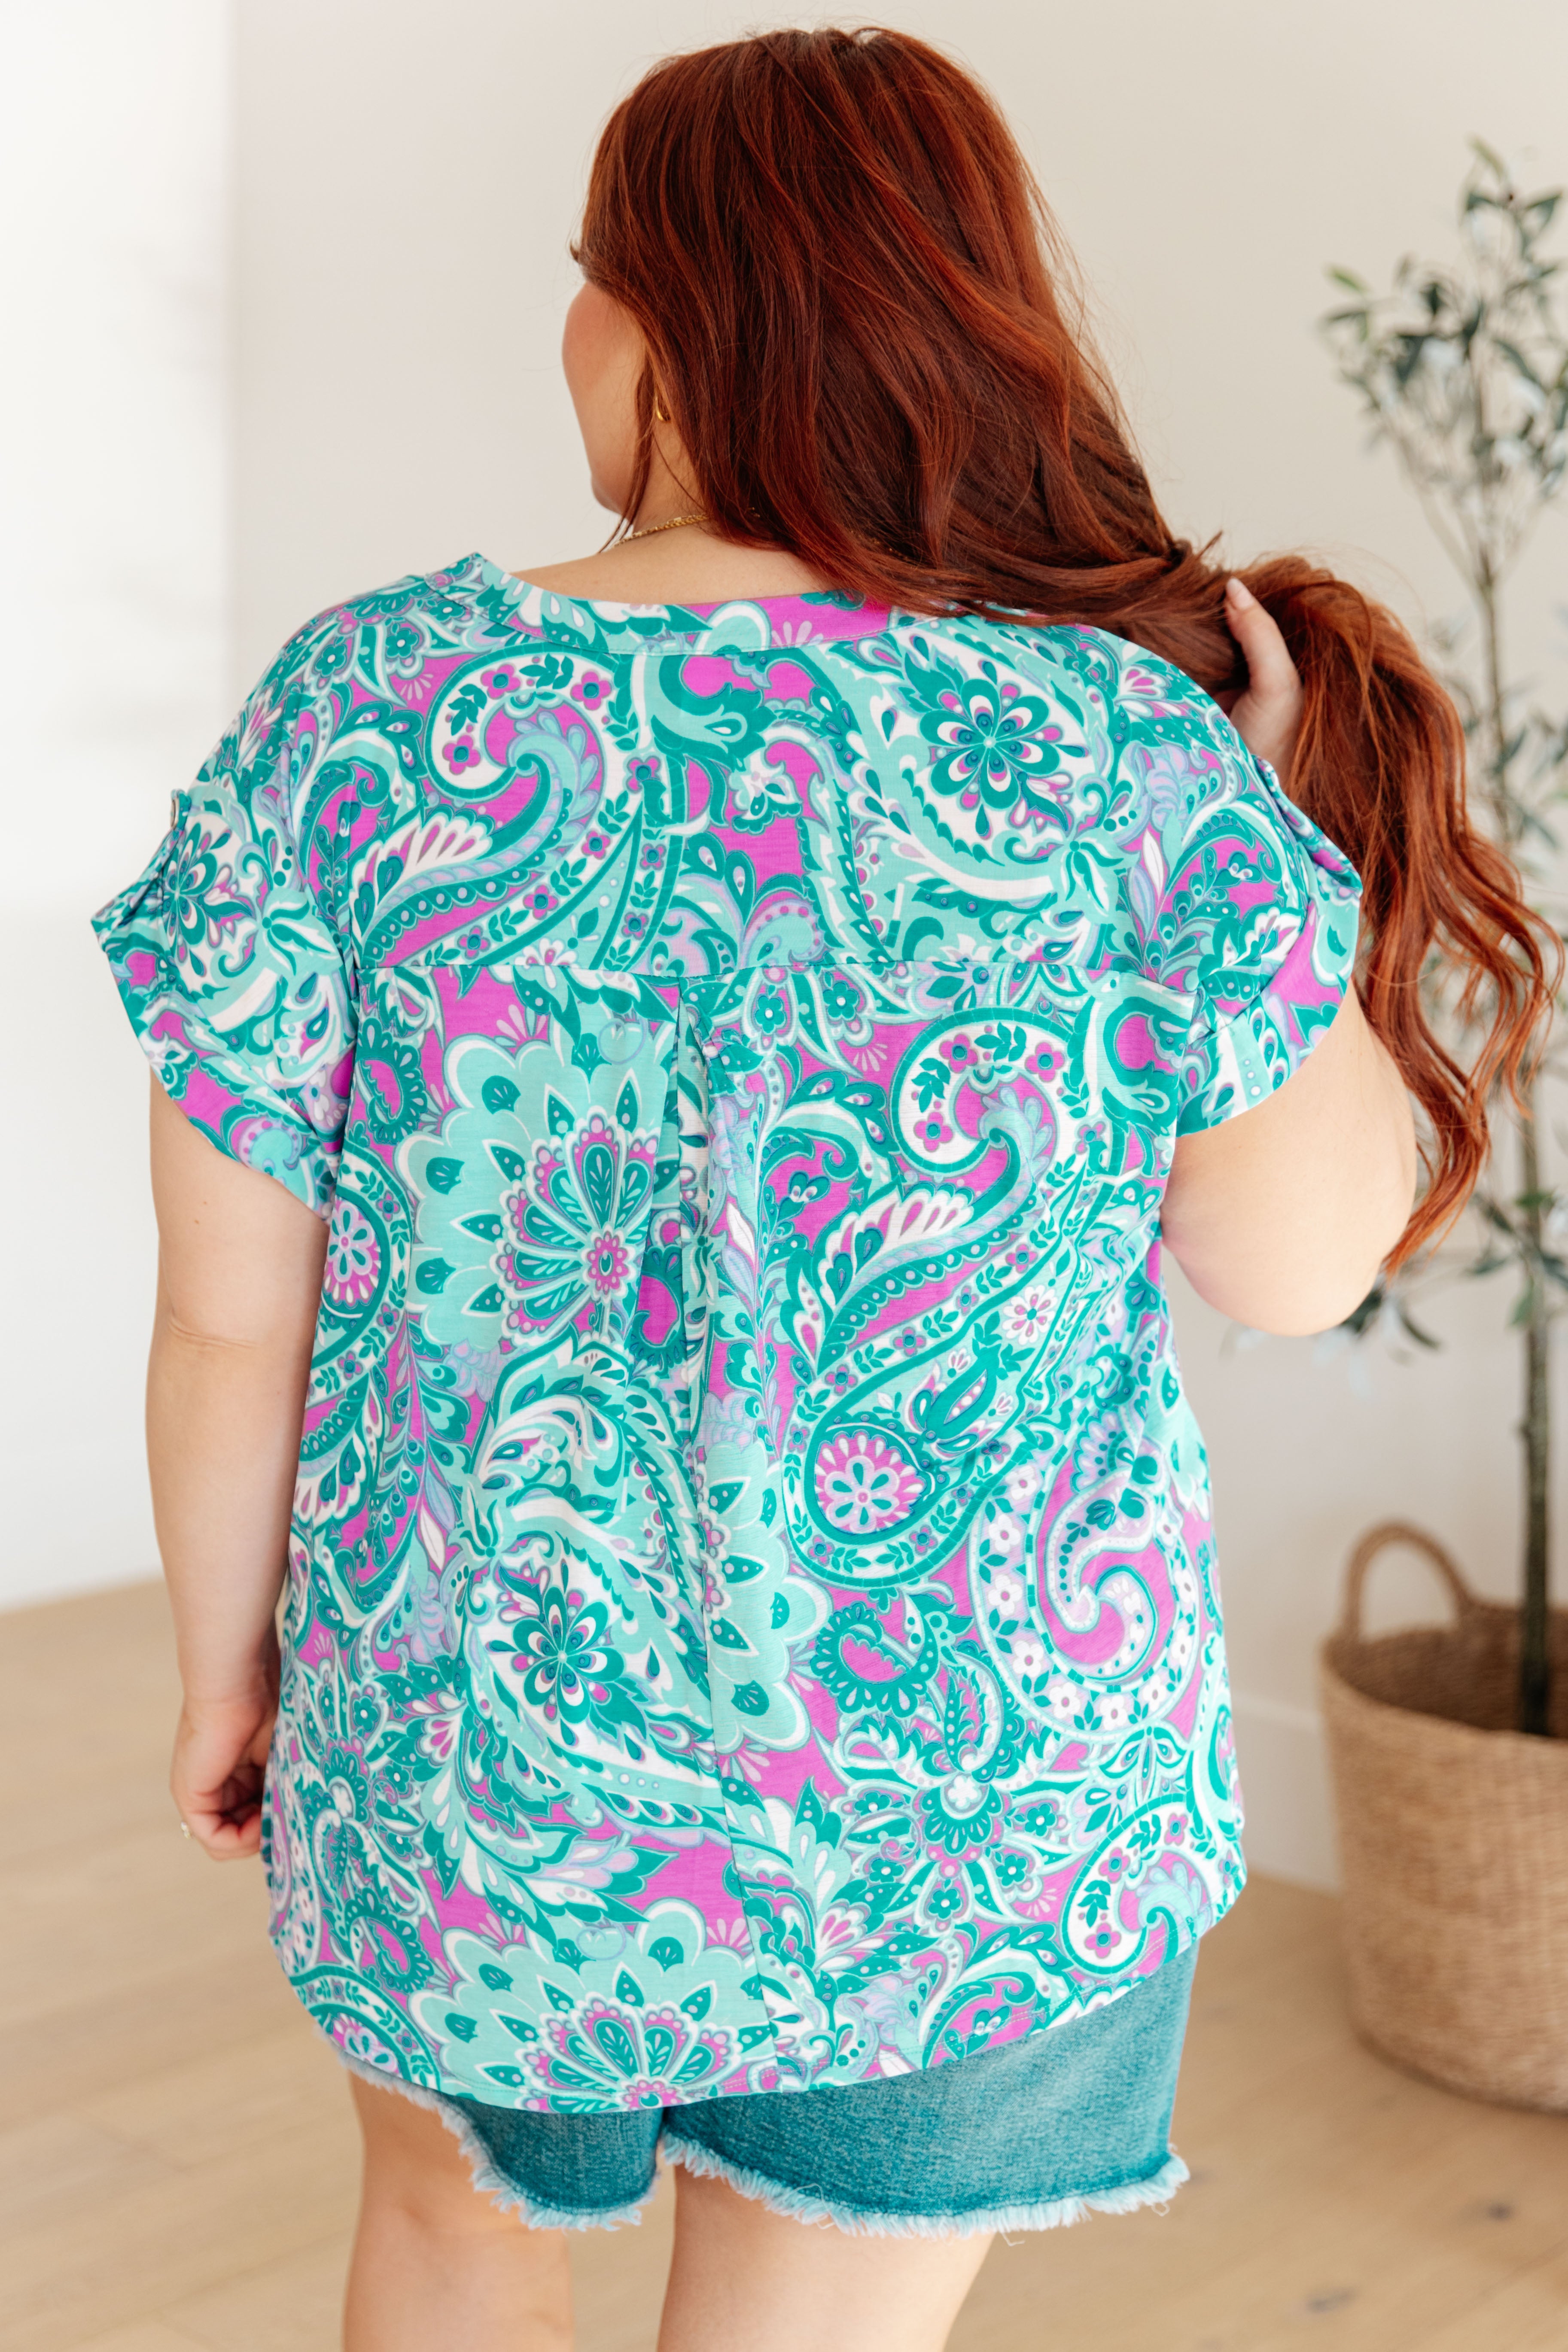 Lizzy Cap Sleeve Top in Magenta and Teal Paisley Ave Shops